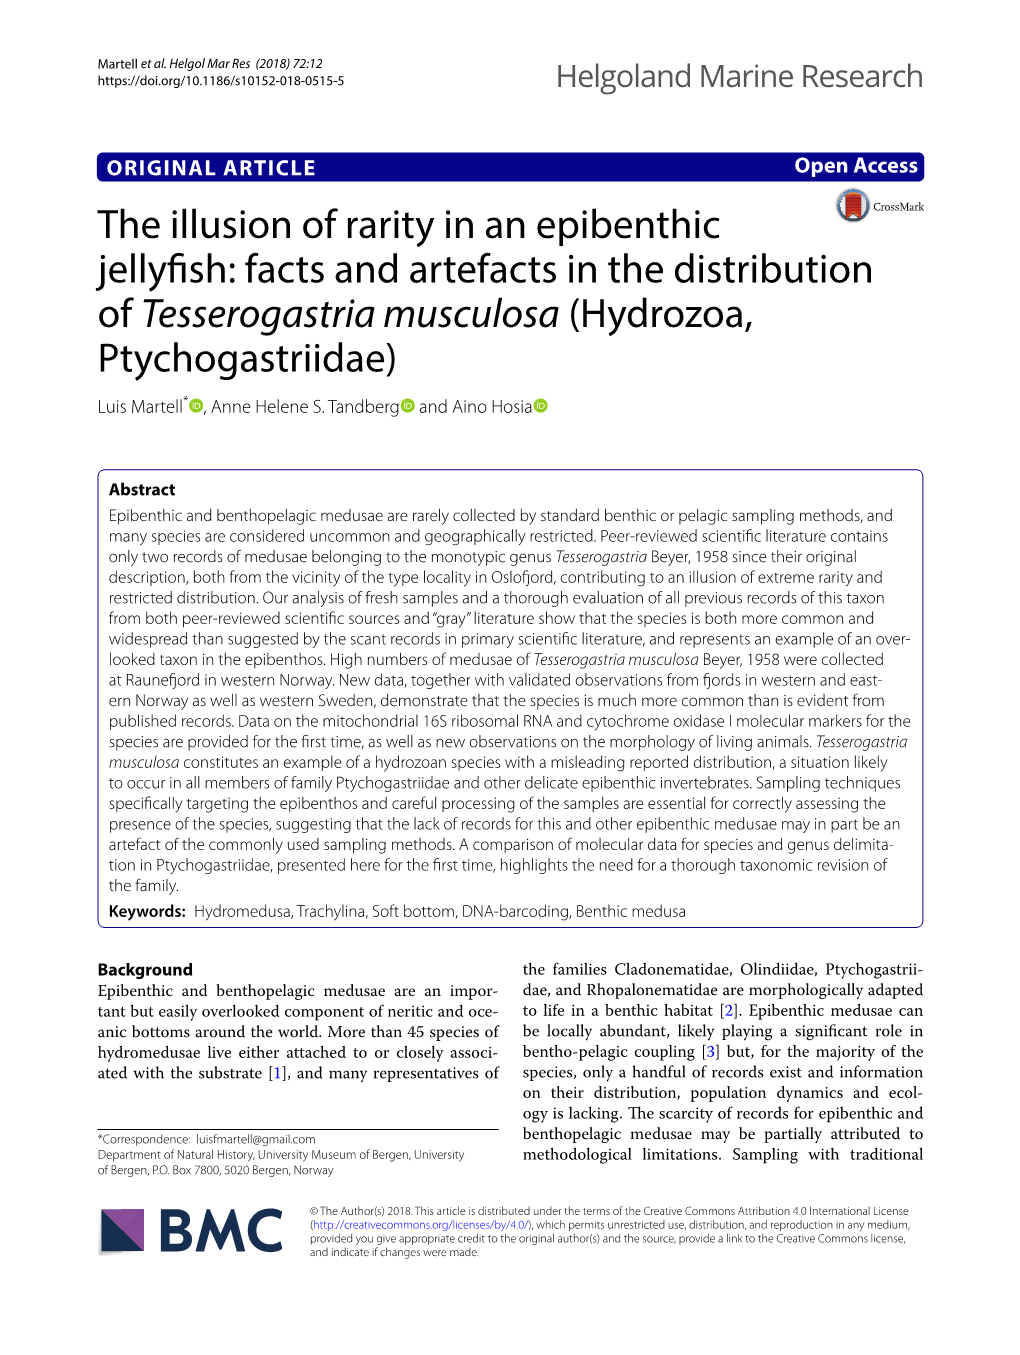 The Illusion of Rarity in an Epibenthic Jellyfish: Facts and Artefacts in The